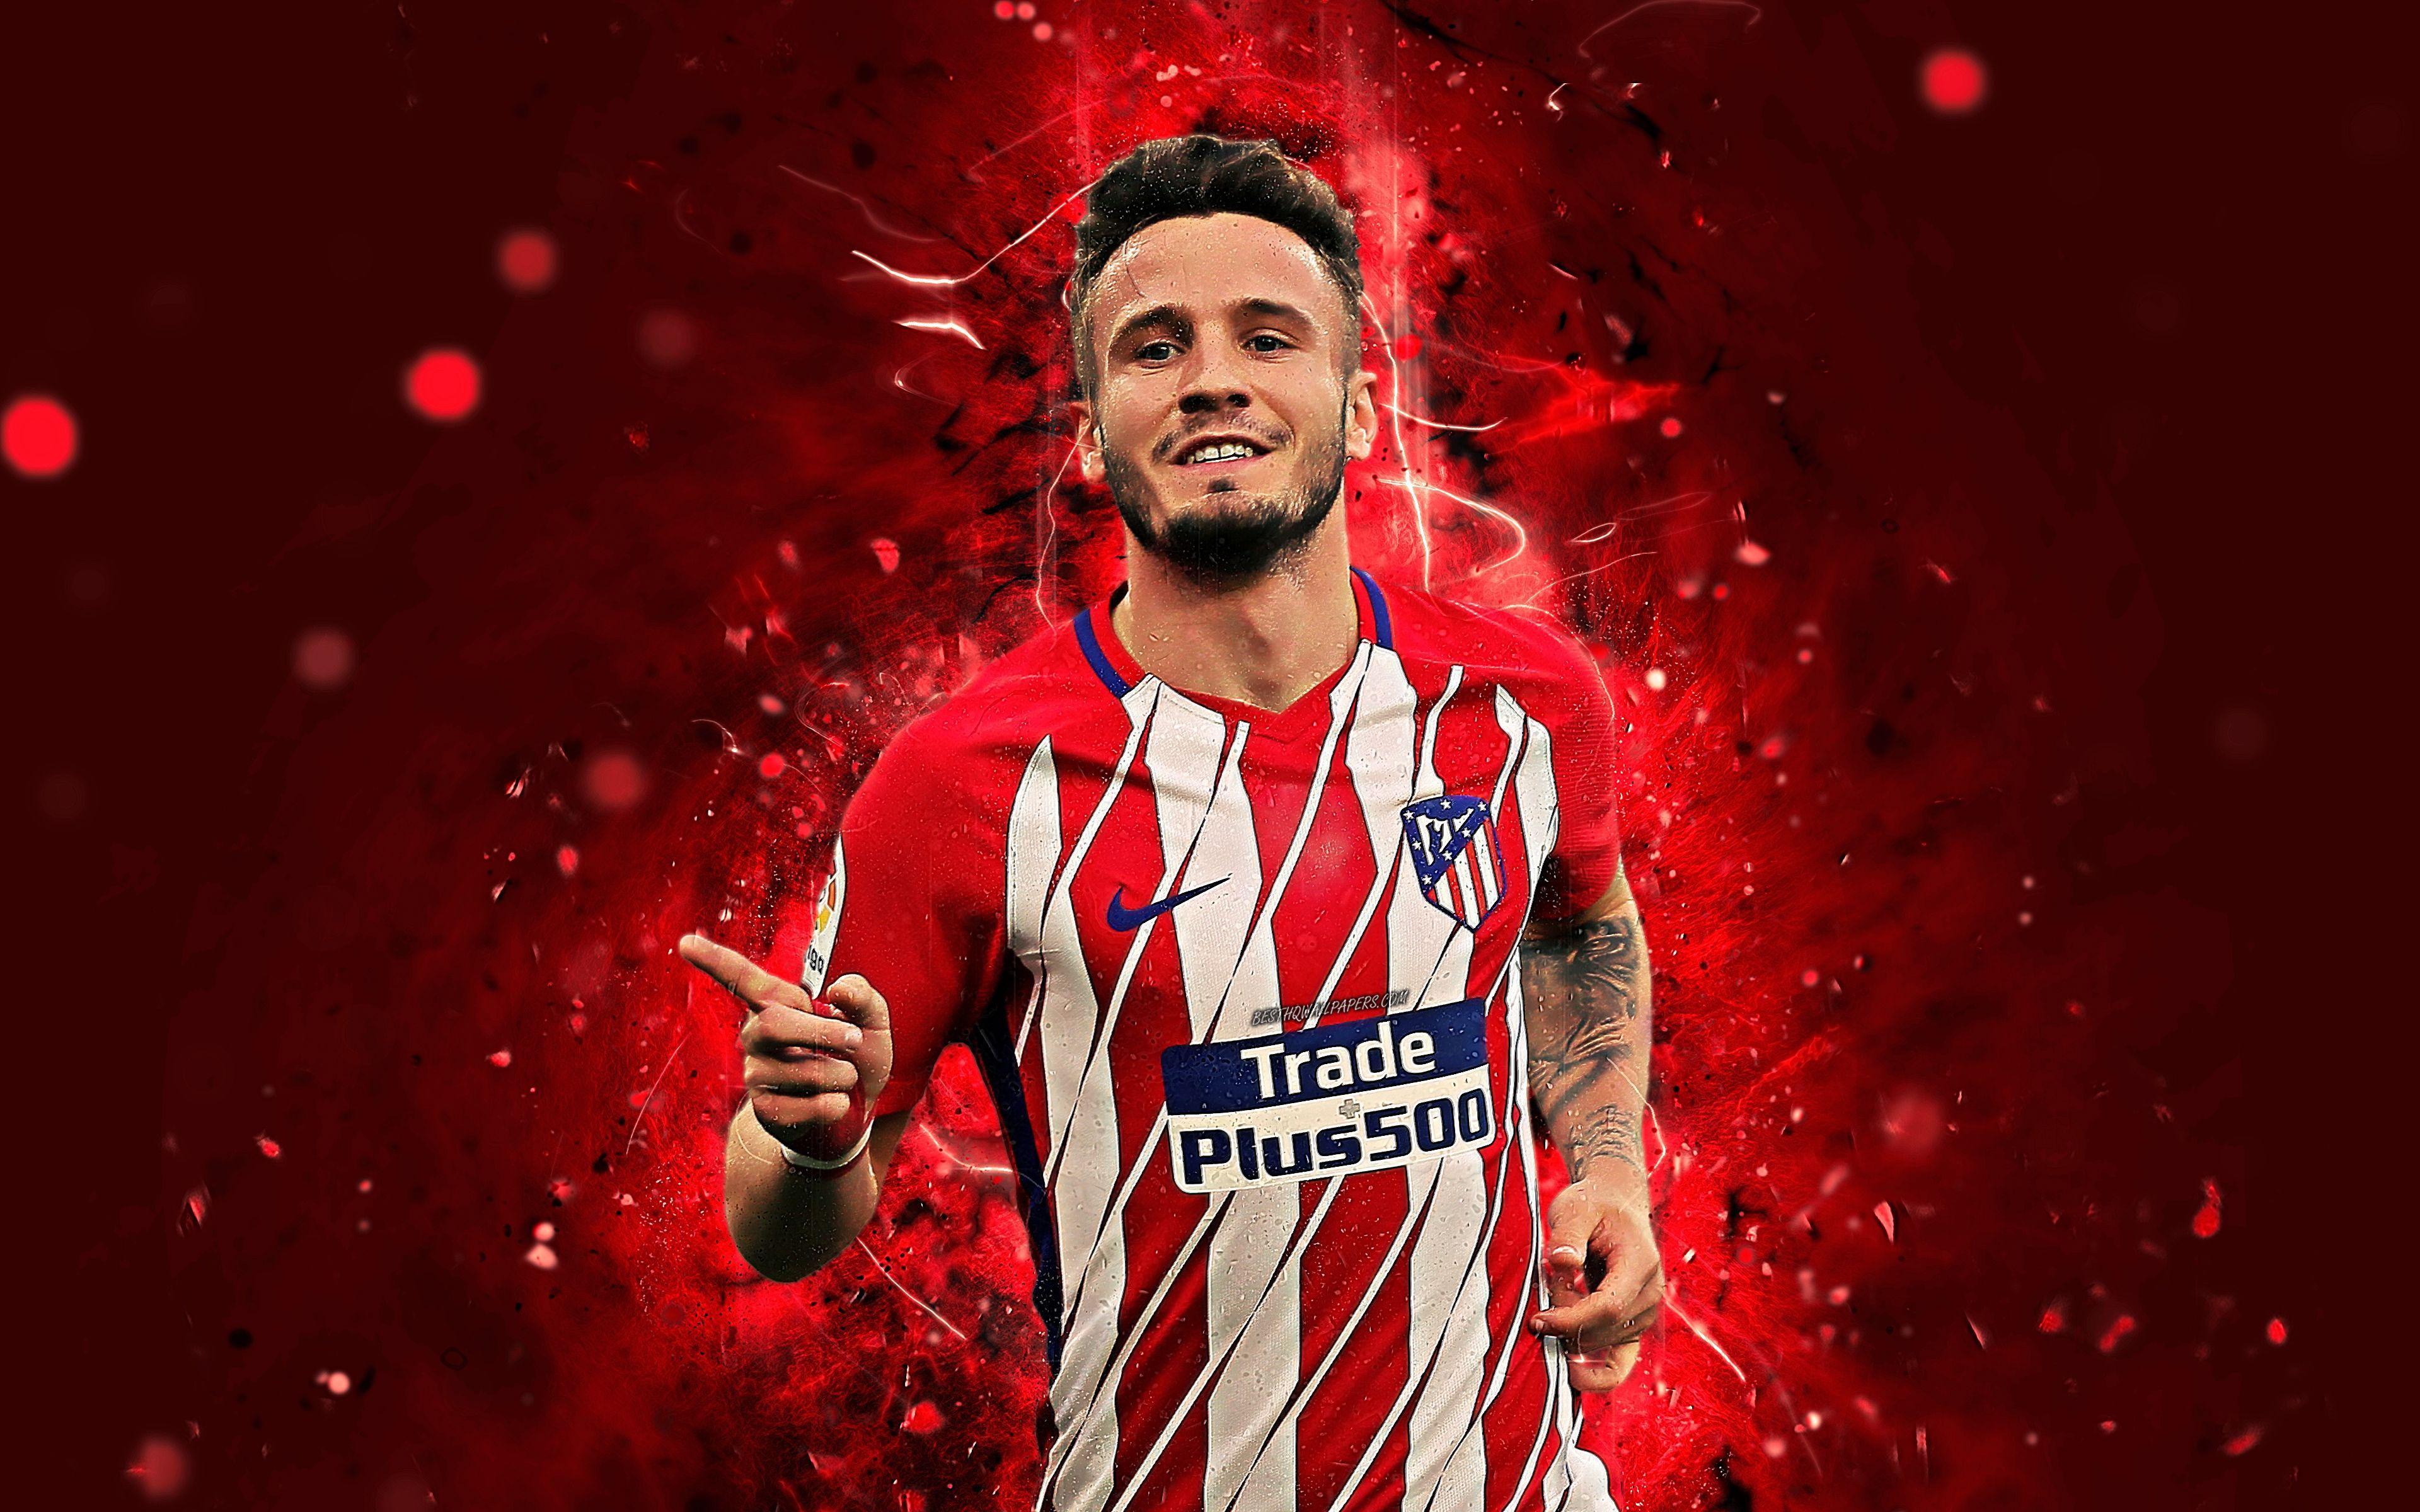 Download wallpapers Saul Niguez, 4k, abstract art, football